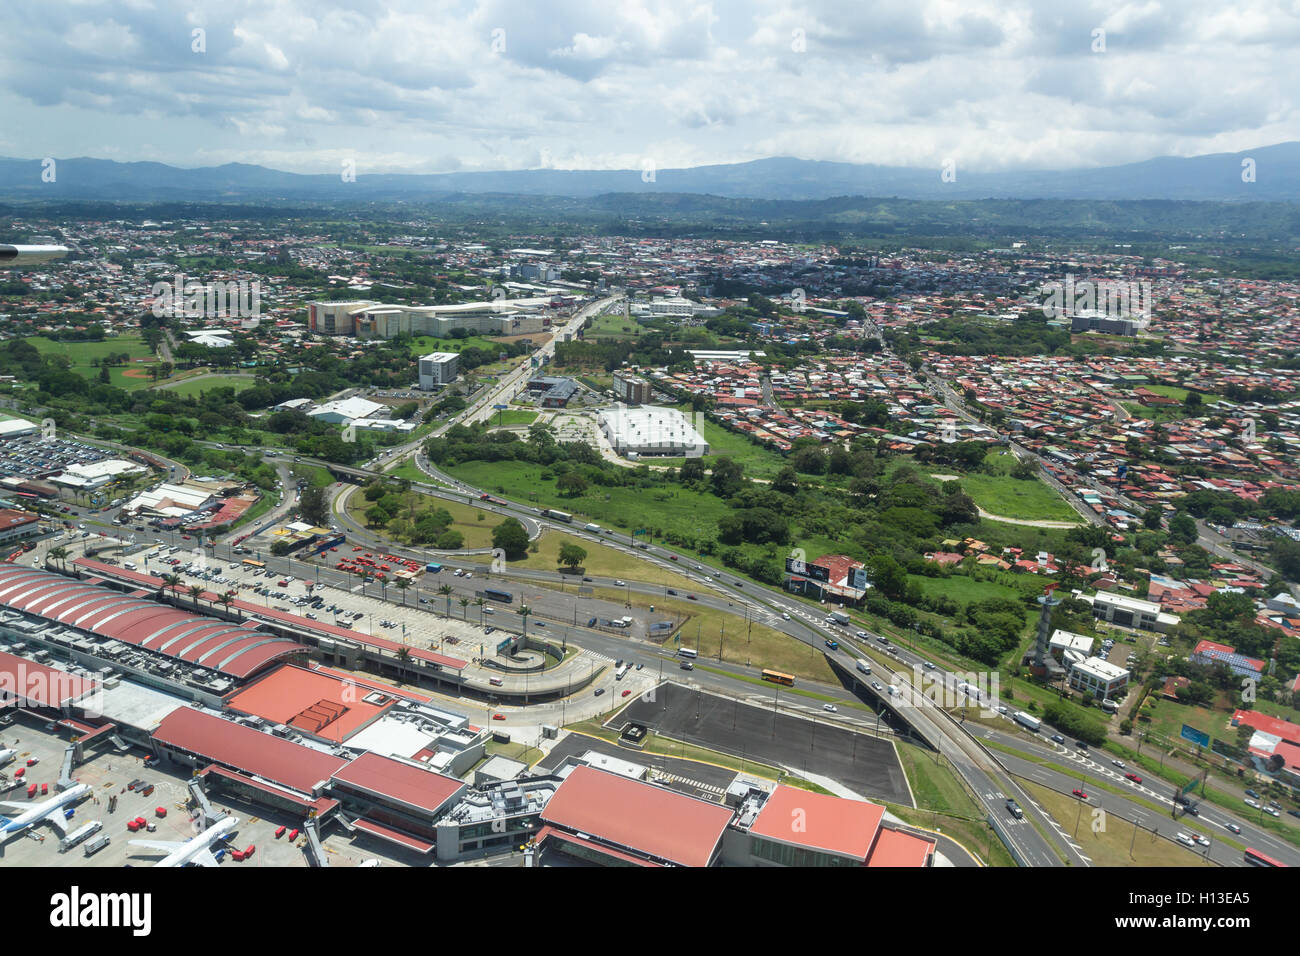 San Jose, Costa Rica - May 24 : aerial view of the city of Alajuela with a partial view of the airport from the interior of a sm Stock Photo